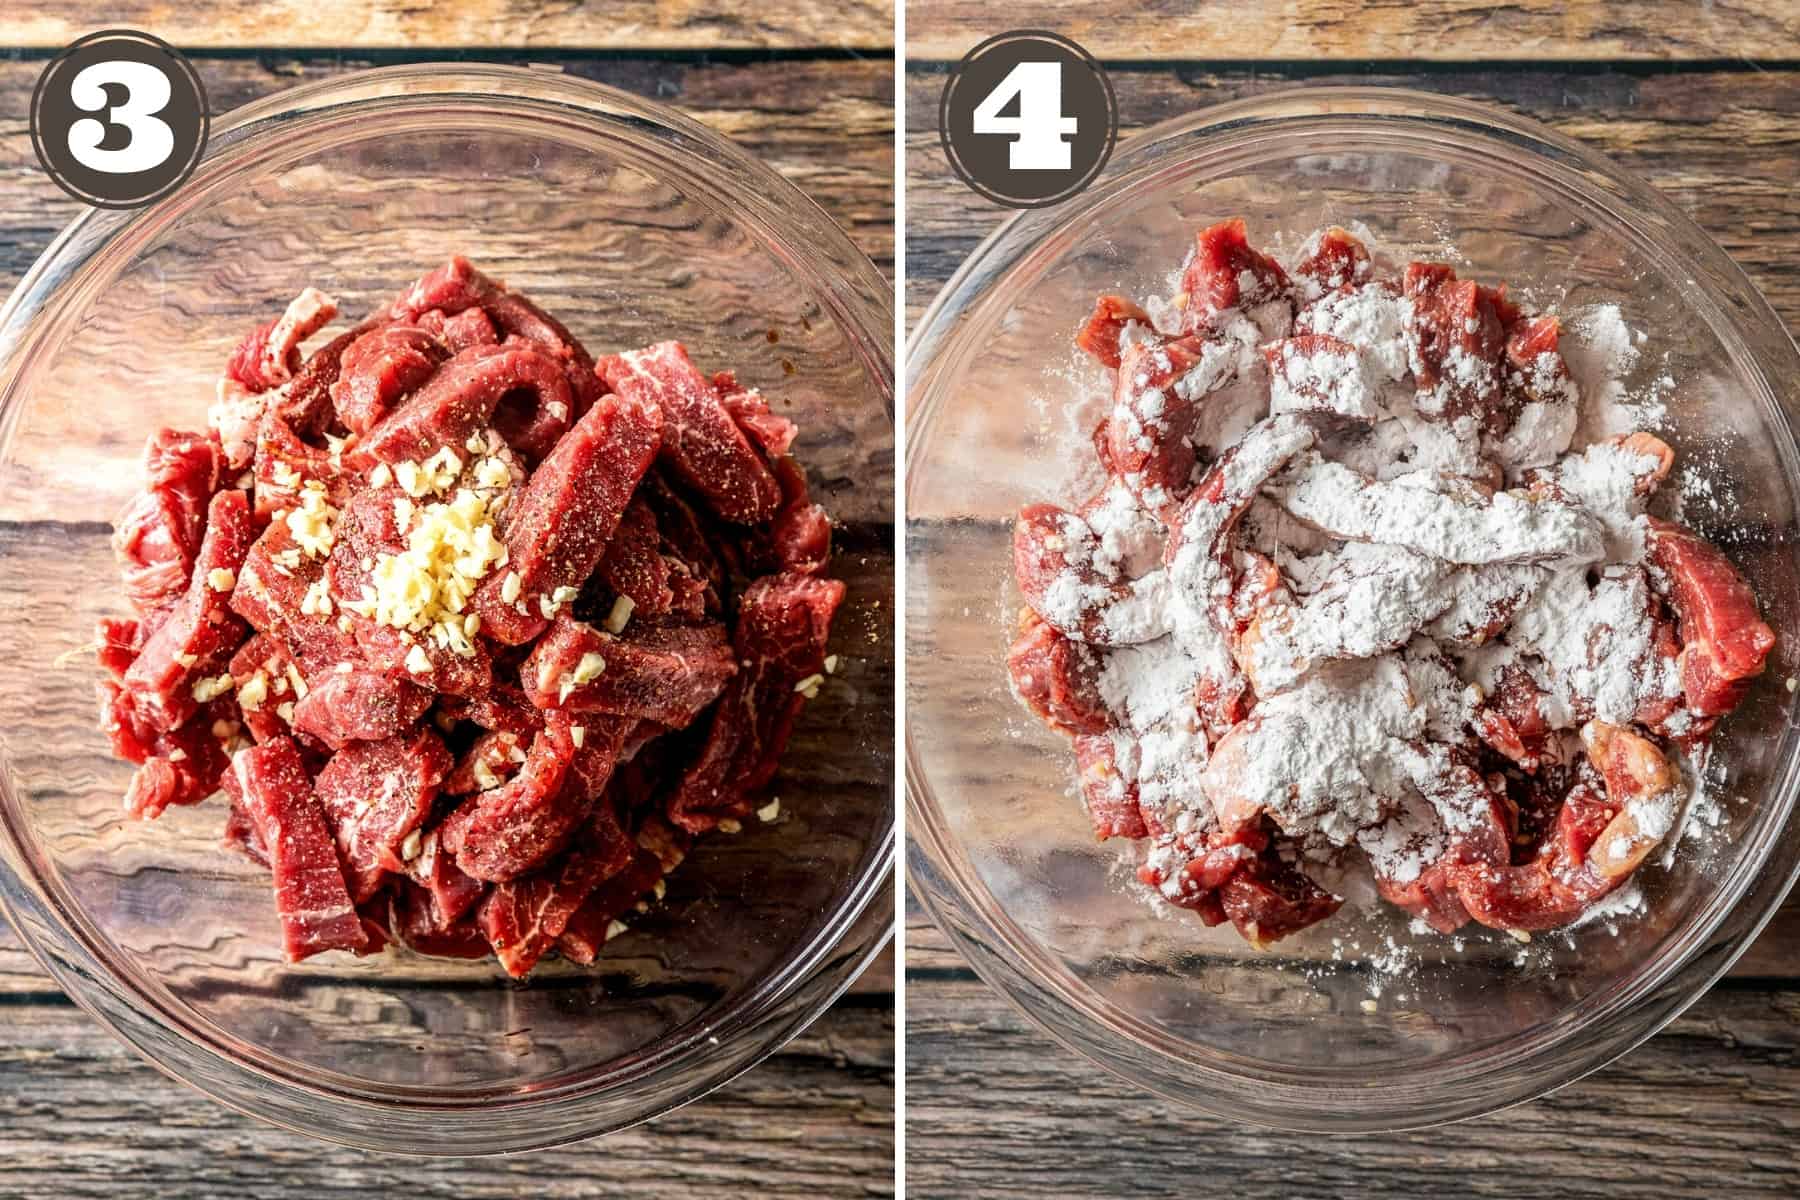 Side by side photos showing sliced flank steak in a glass bowl being marinaded.